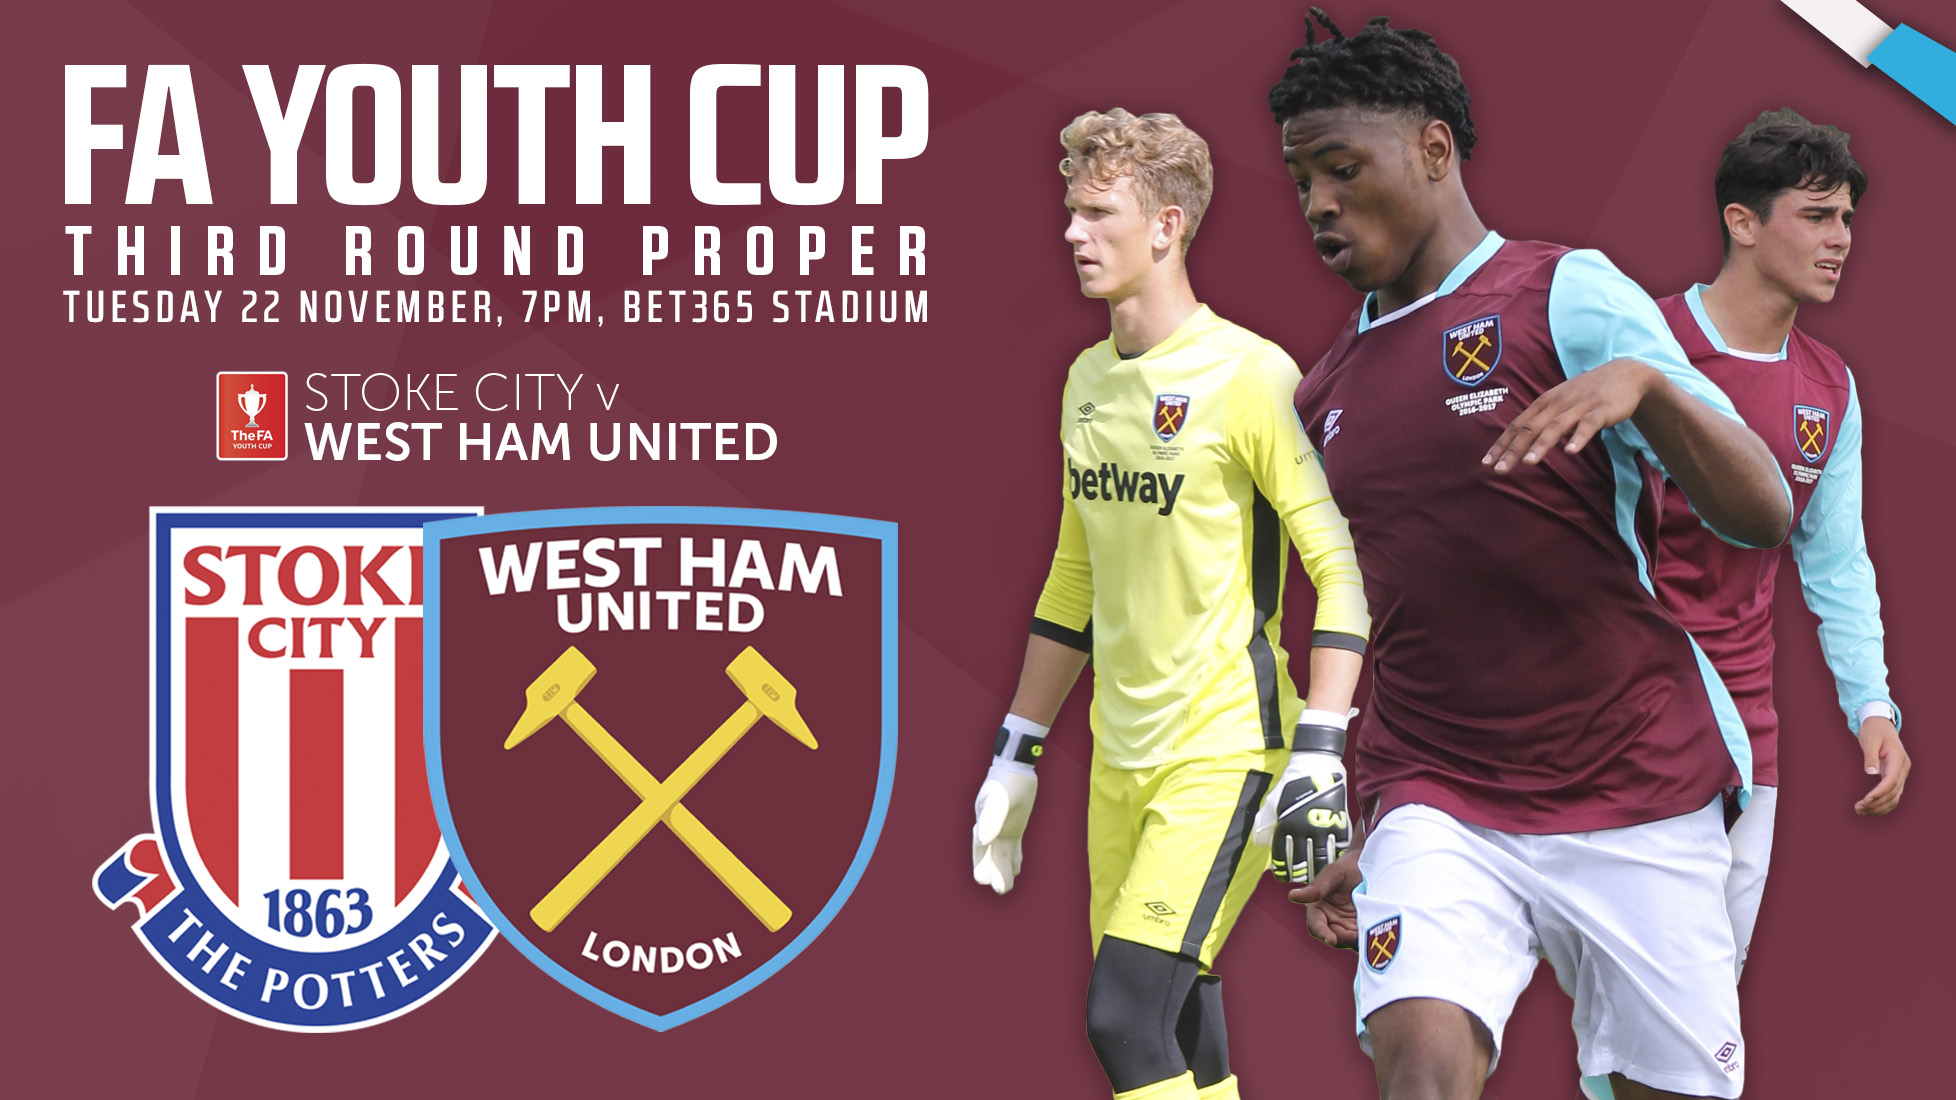 FA Youth Cup 3rd Round - Stoke City v West Ham United